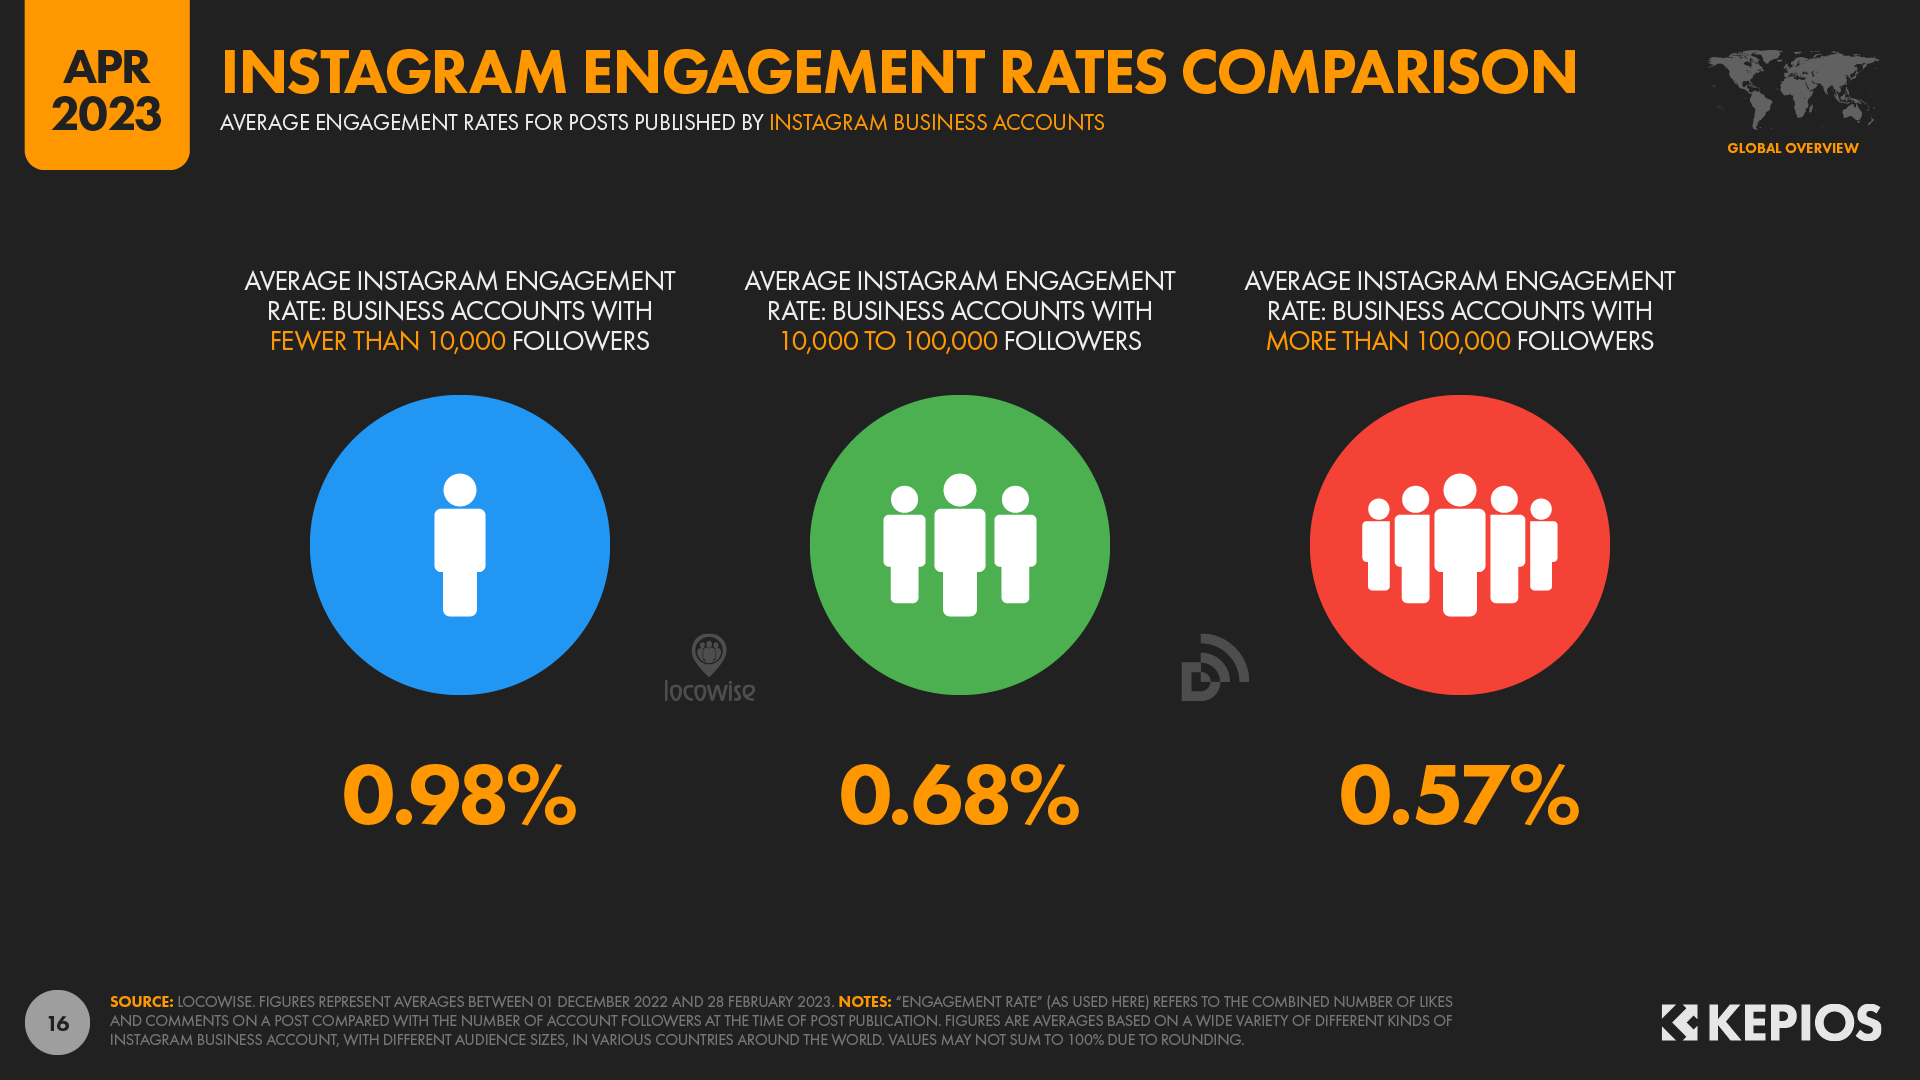 Instagram engagement rate comparison business accounts by followers